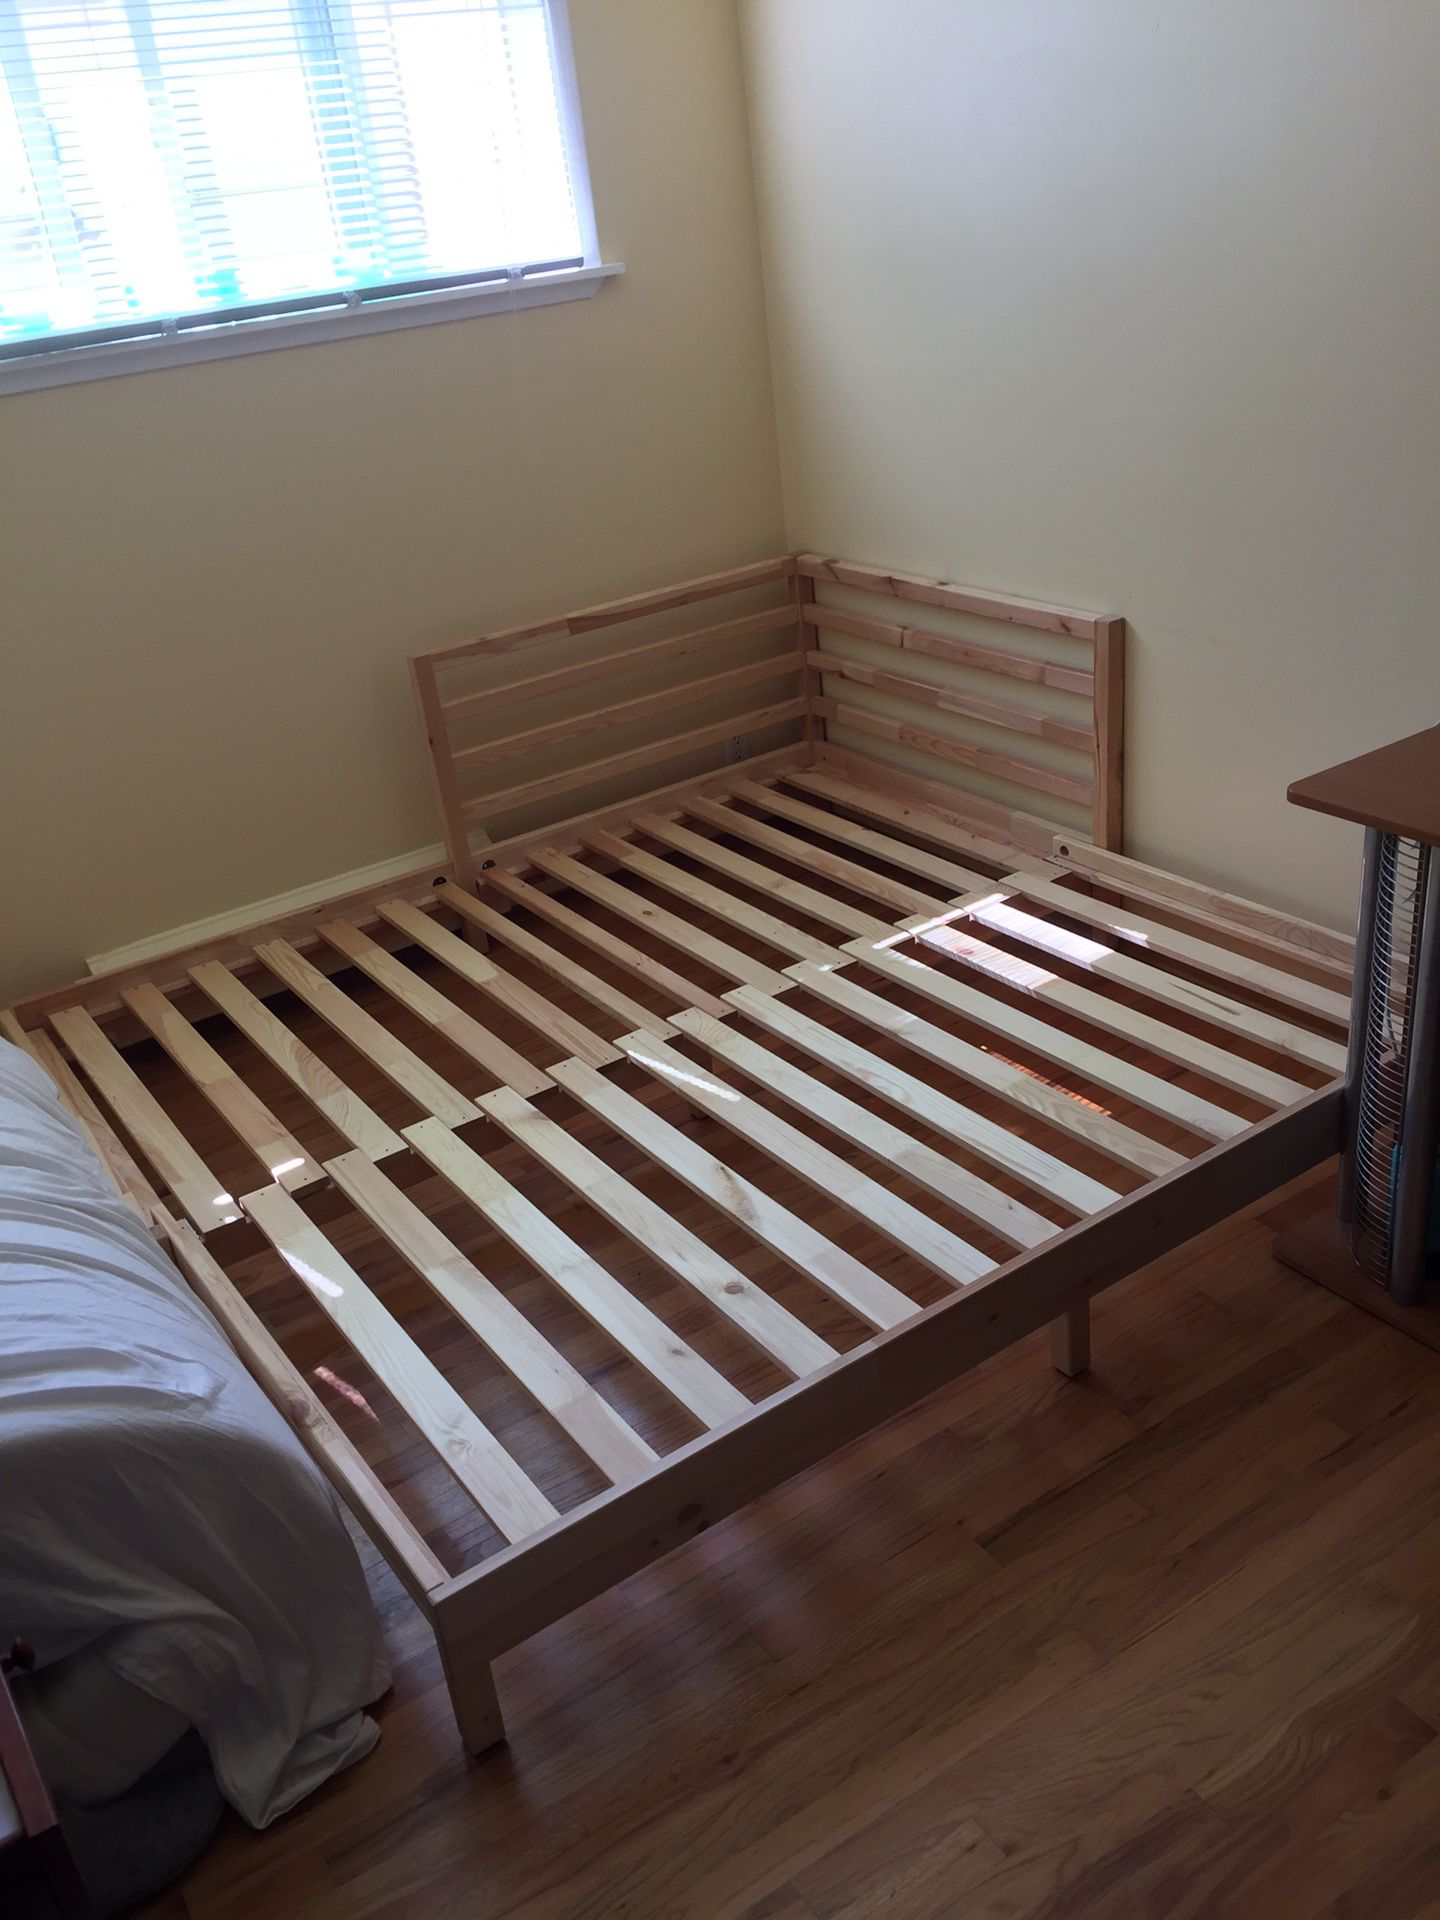 IKEA Twin / Full bed frame; Extends to fit two twins side-by-side